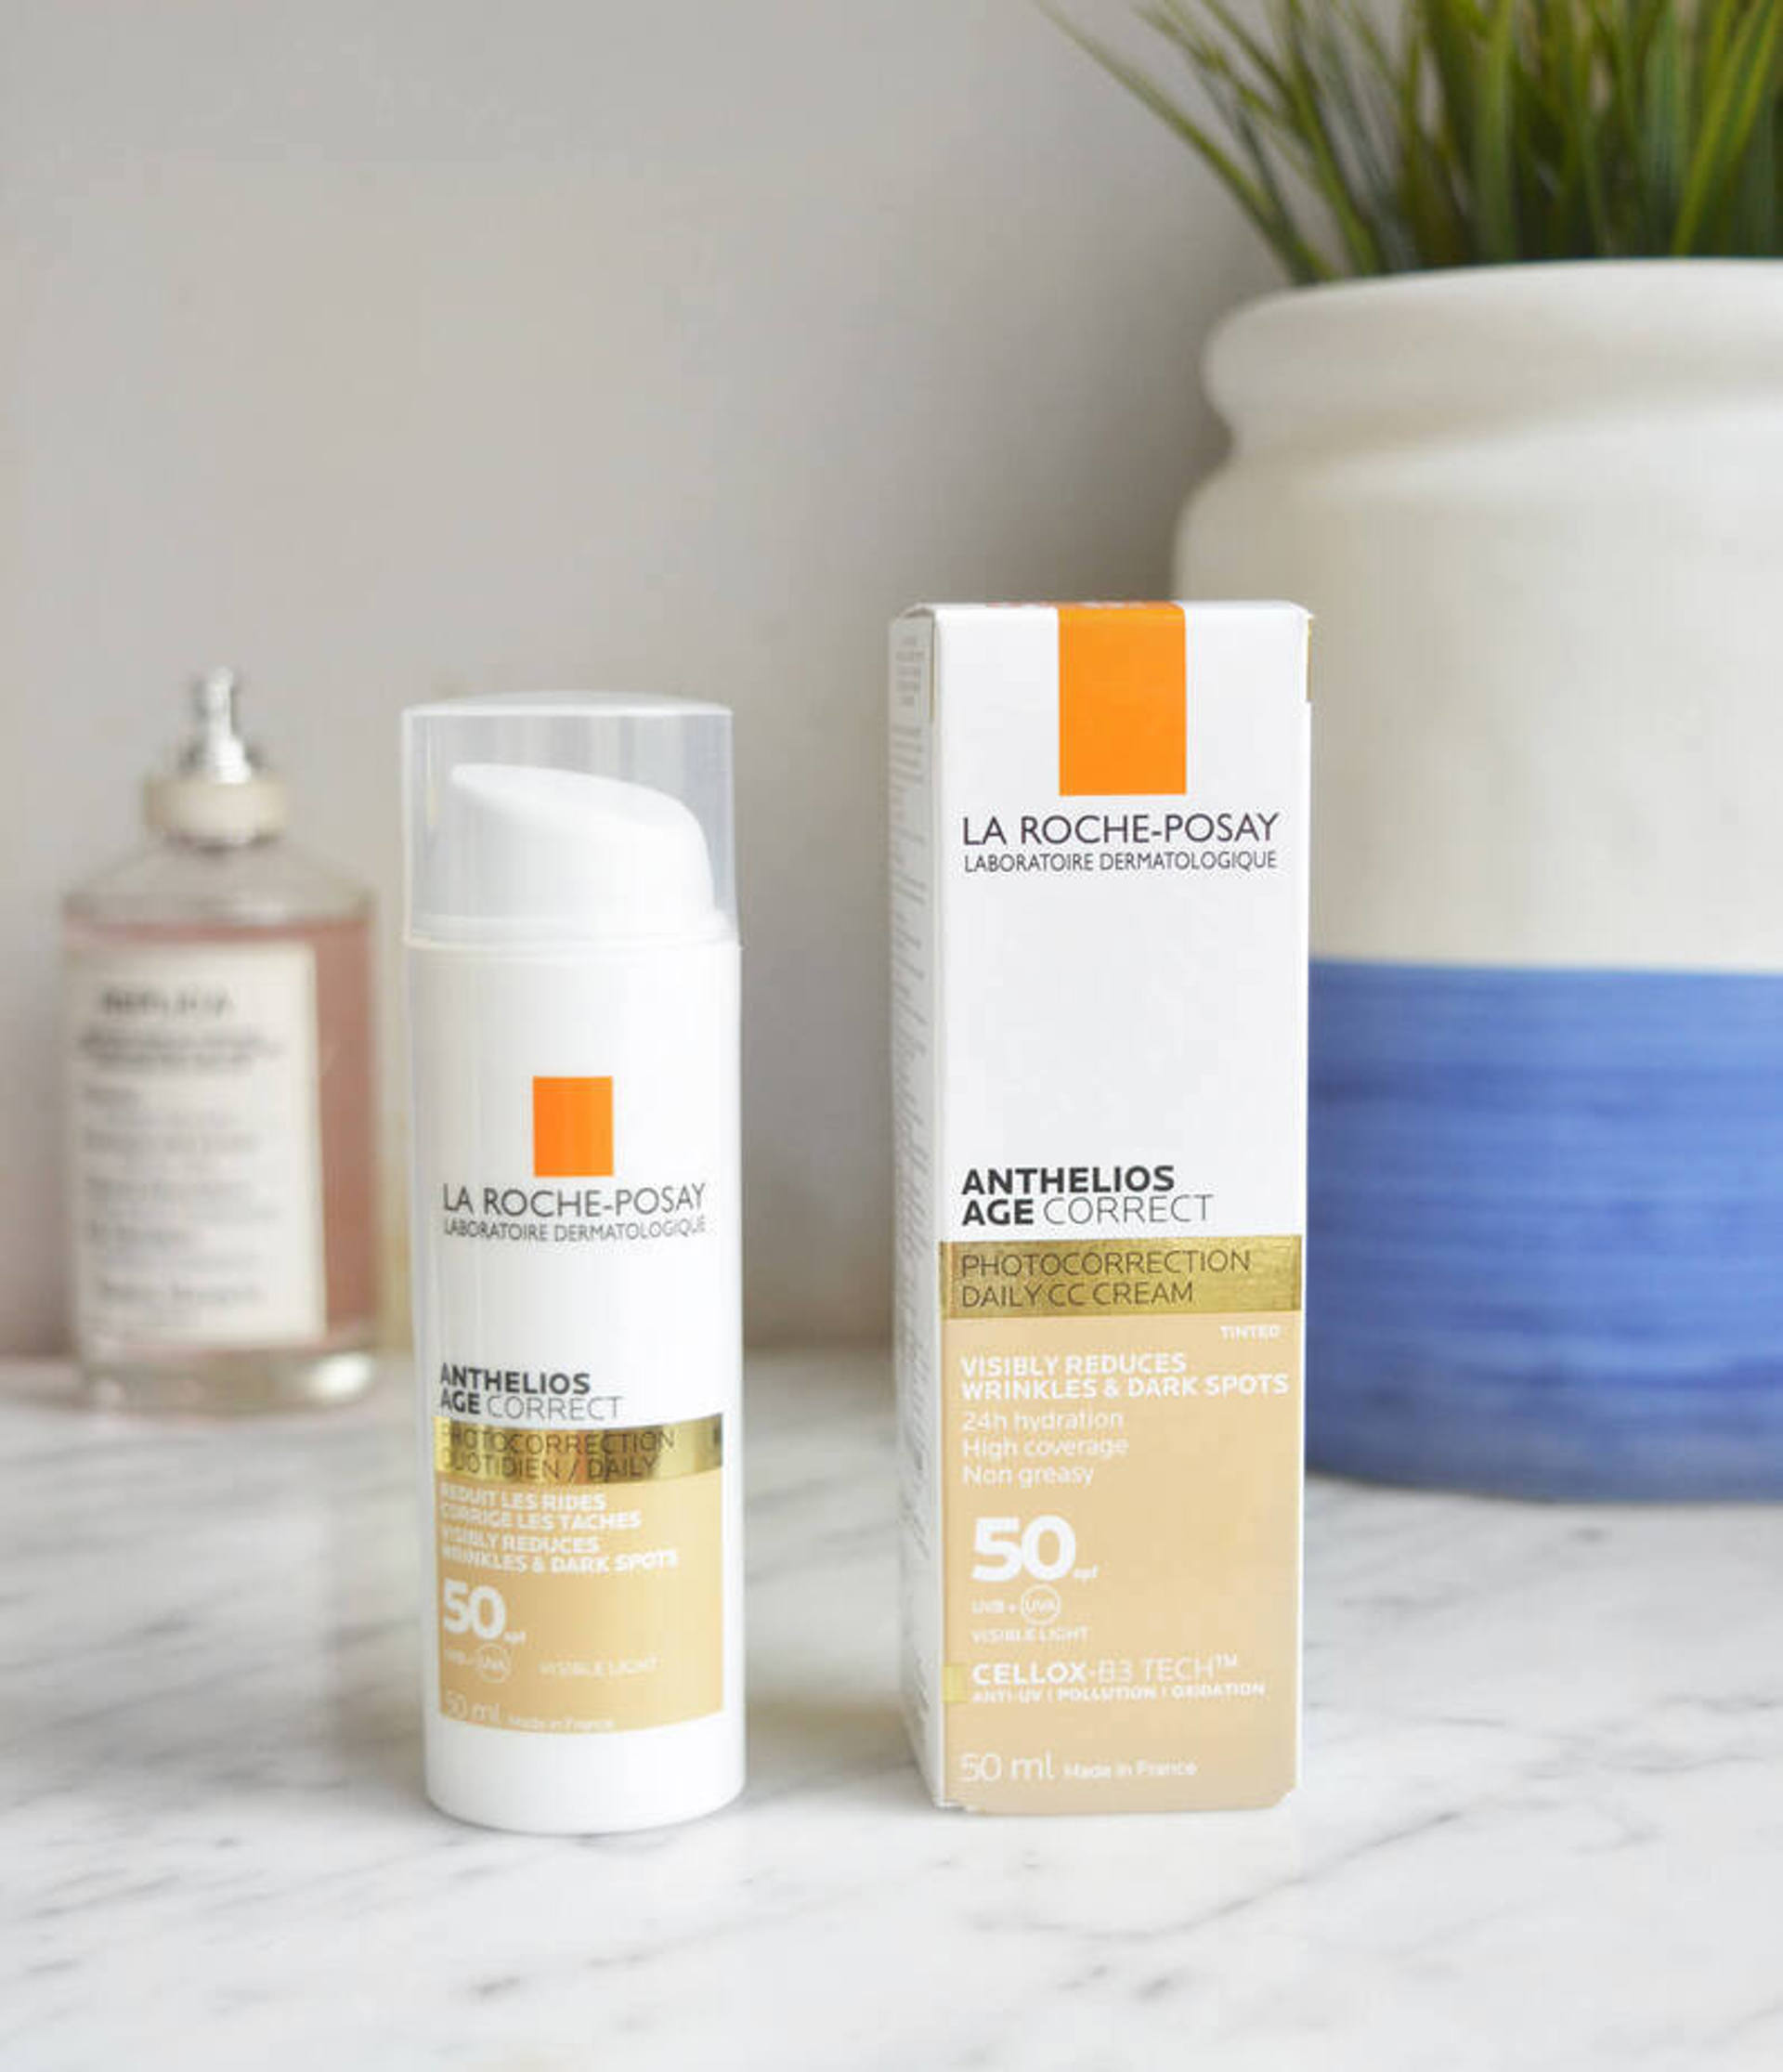 La Roche Posay Anthelios Age Correct SPF 50 Tinted